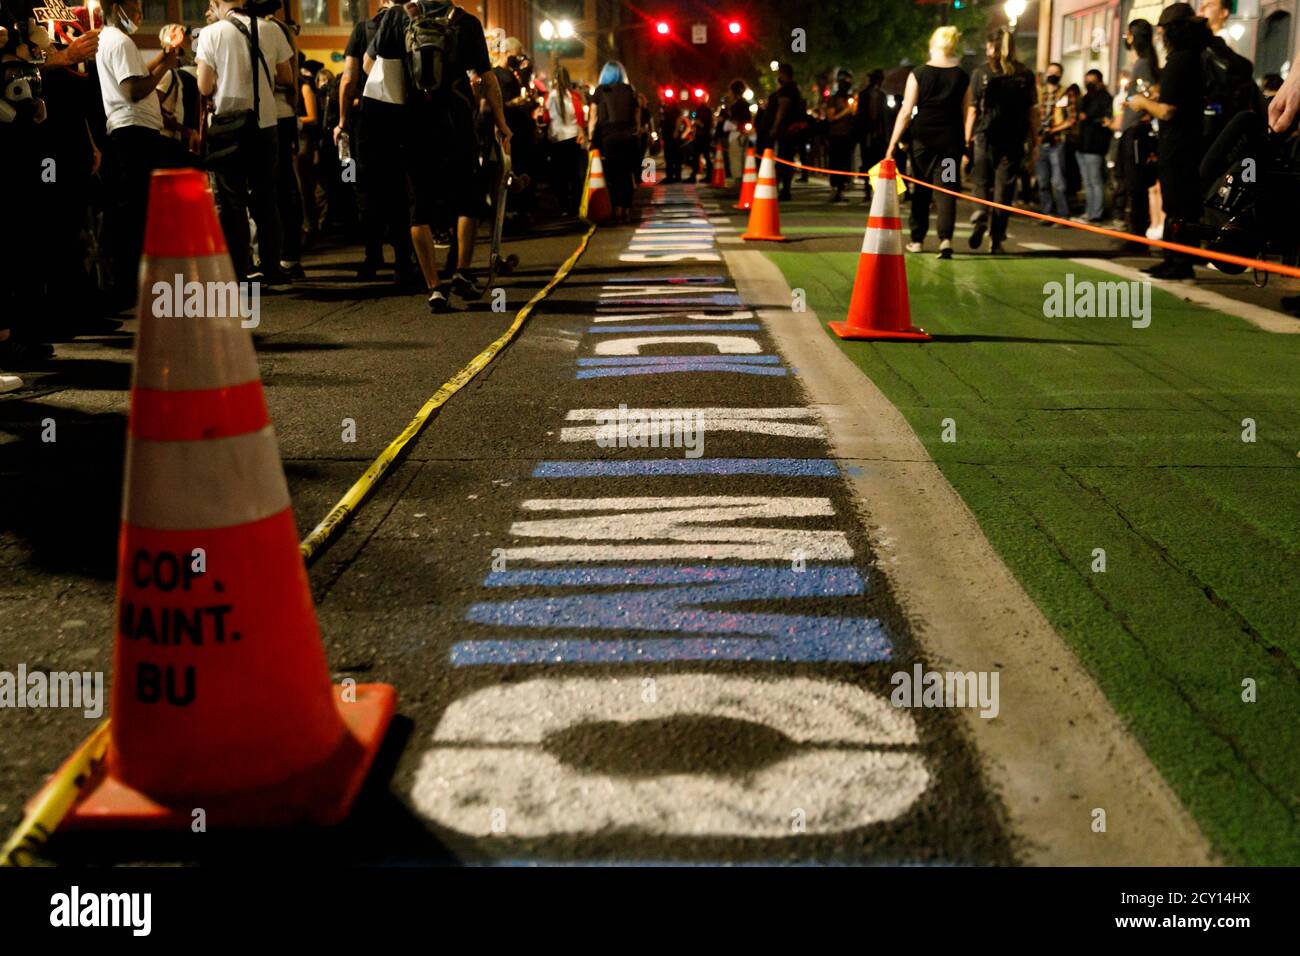 Portland, USA. 30th Sep, 2020. Patrick Kimmons, a 27-year old black man shot by police two years ago today, was commemorated with speeches and street-painting at the site of his death in Portland, Oregon on Sept. 30, 2020. (Photo by John Rudoff/Sipa USA) Credit: Sipa USA/Alamy Live News Stock Photo